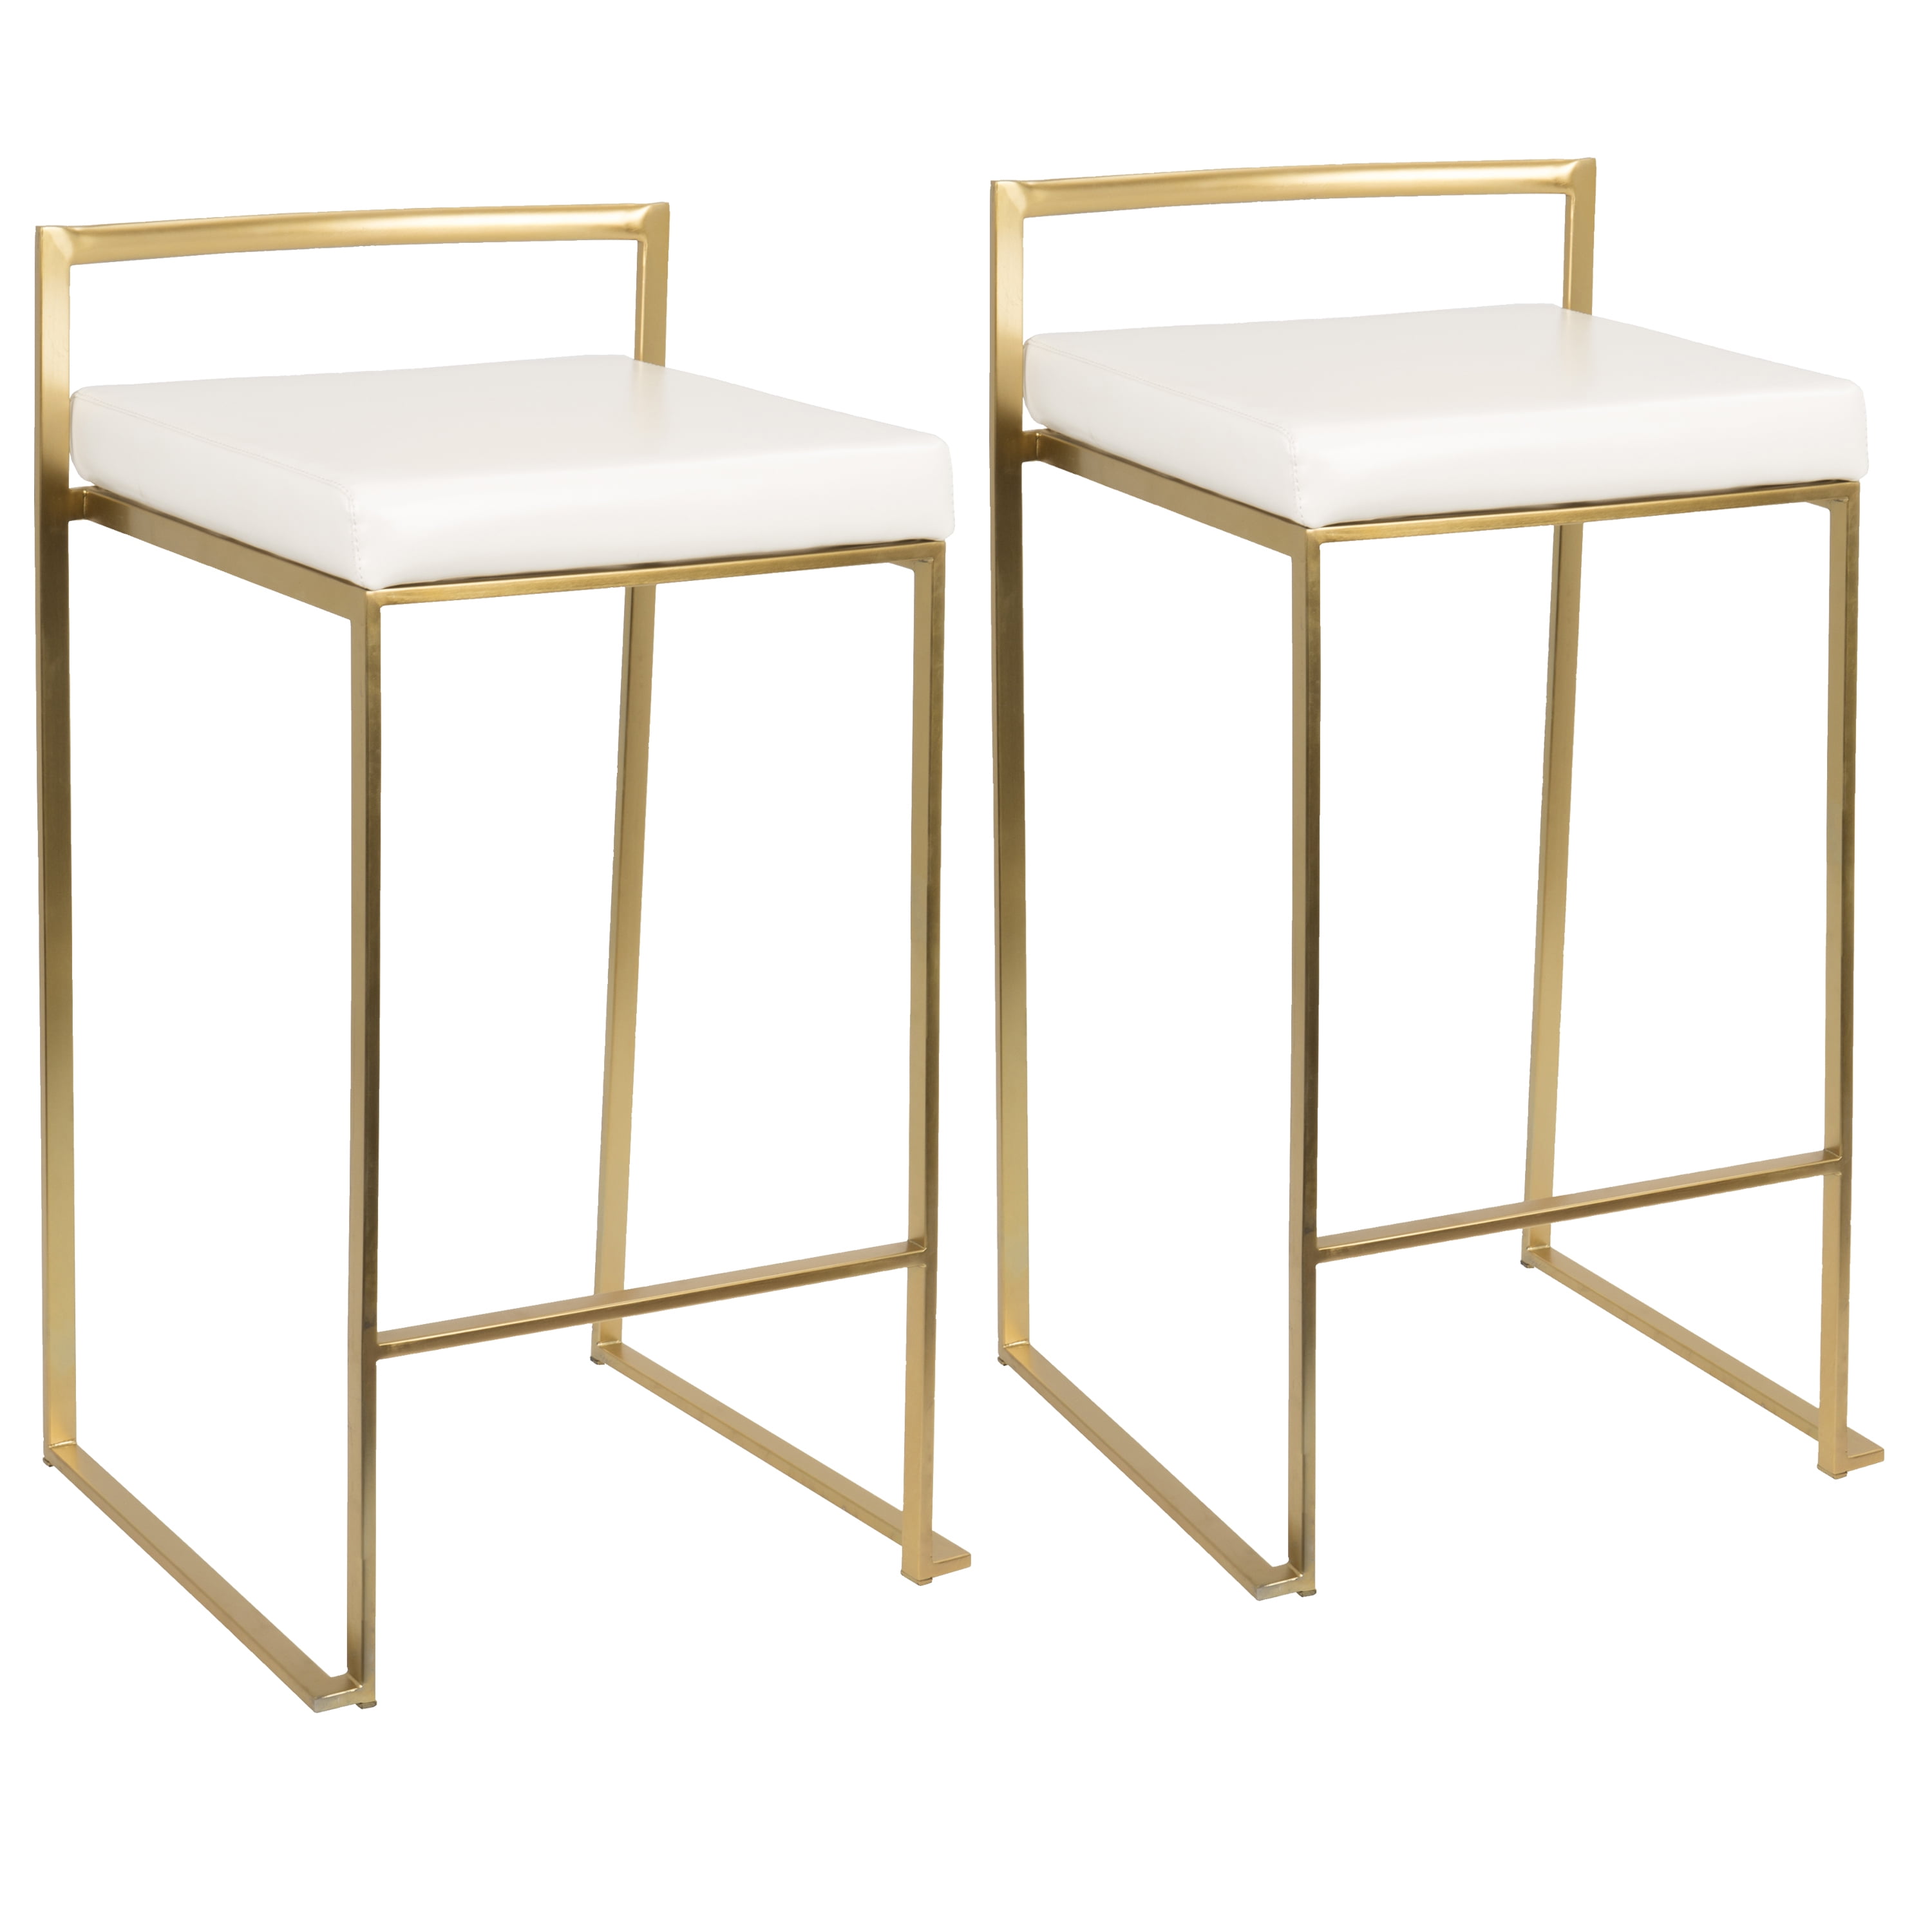 Fuji Contemporary Counter Stool In Gold, White Leather Bar Stools Contemporary